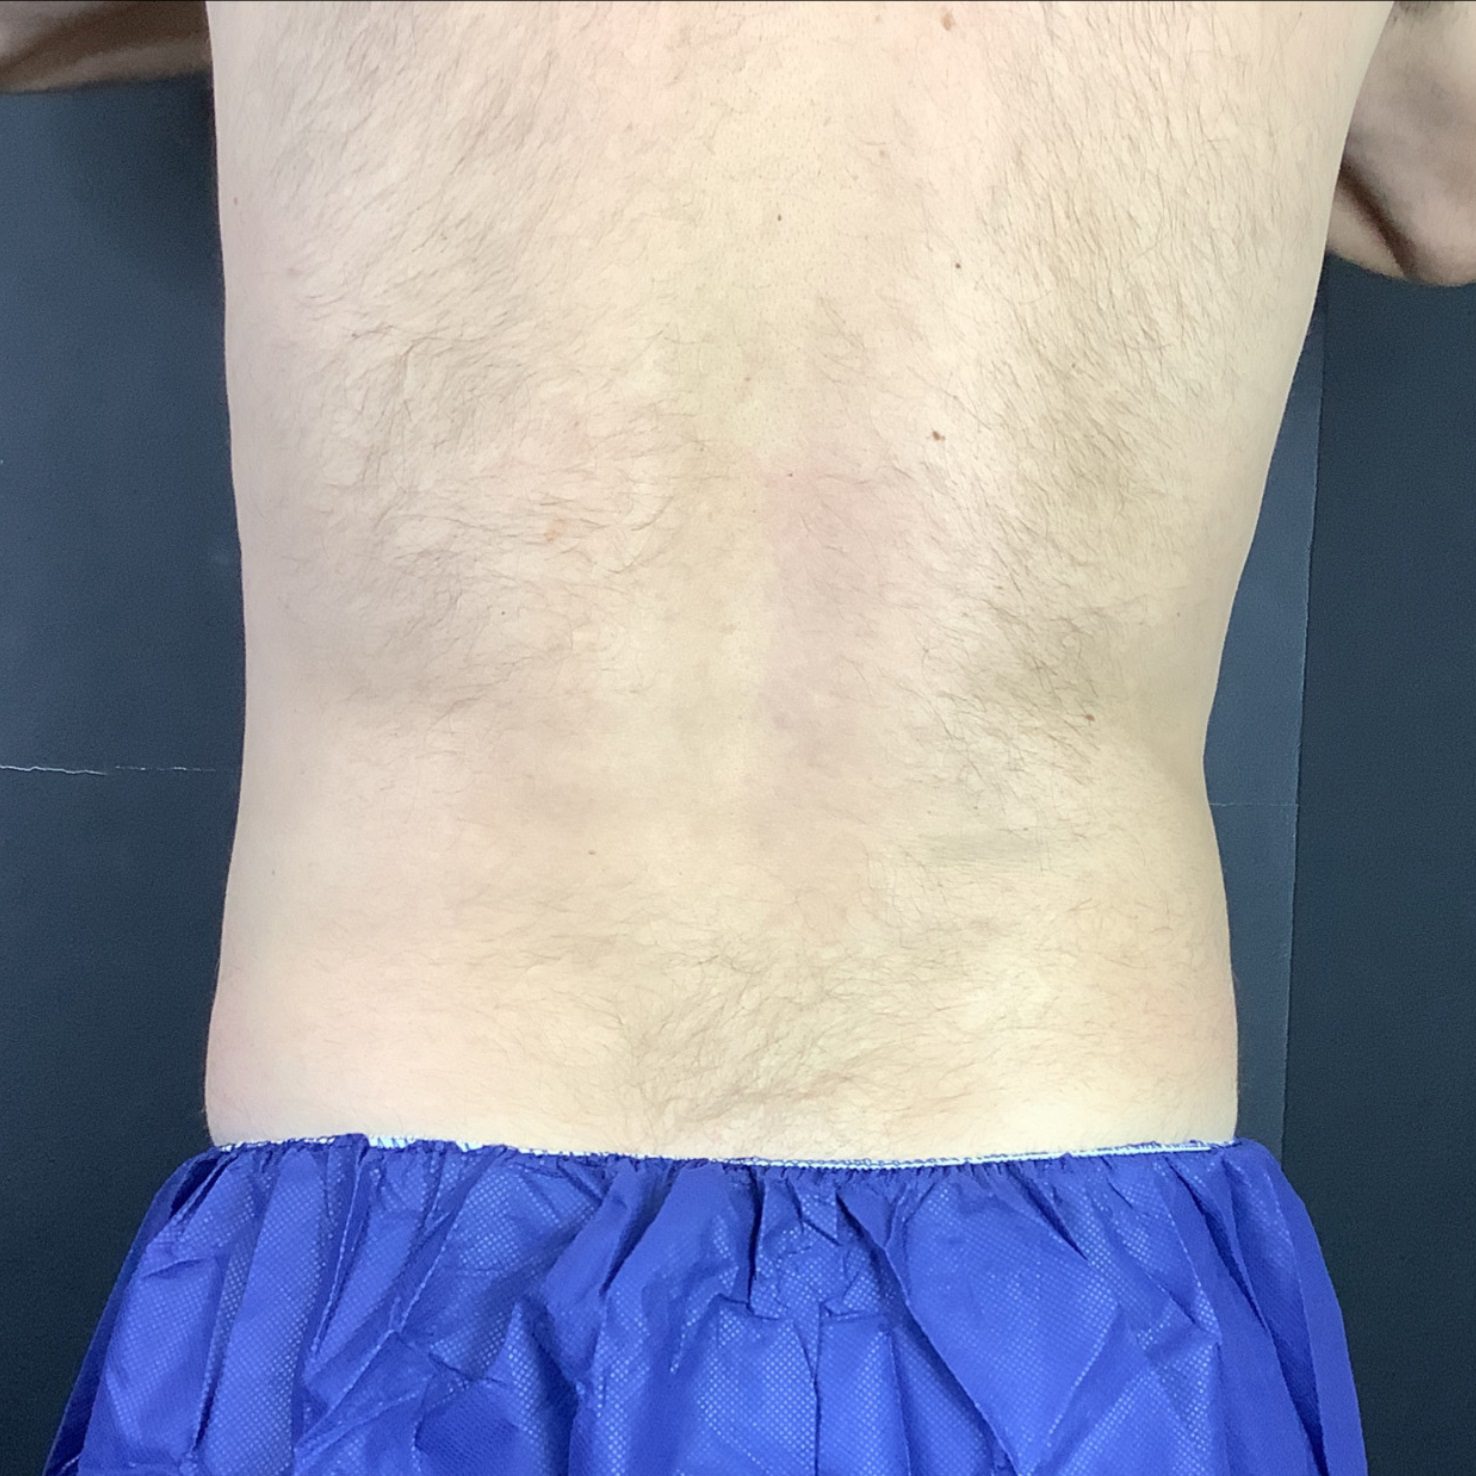 coolsculpting fat freezing muffin top, flanks before